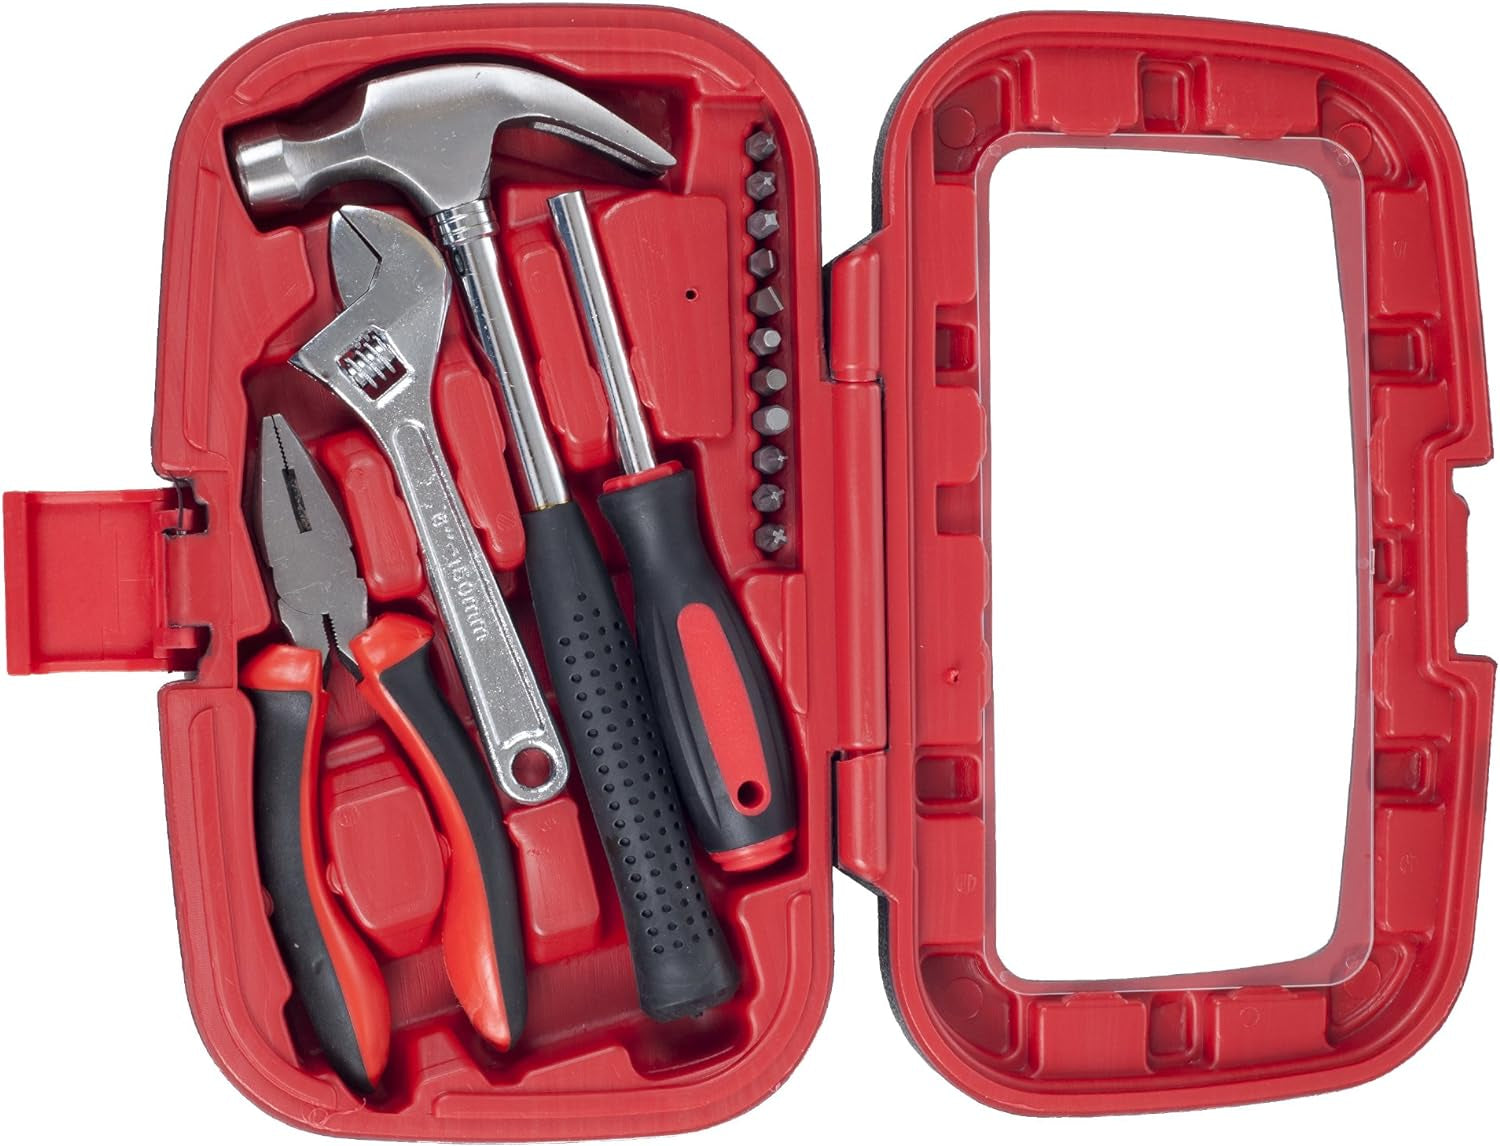 15-Piece Tool Set Household Tool Kit with Hammer, Multi-Bit Screwdriver Set, Pliers, Wrench- Tools and Equipment for DIY